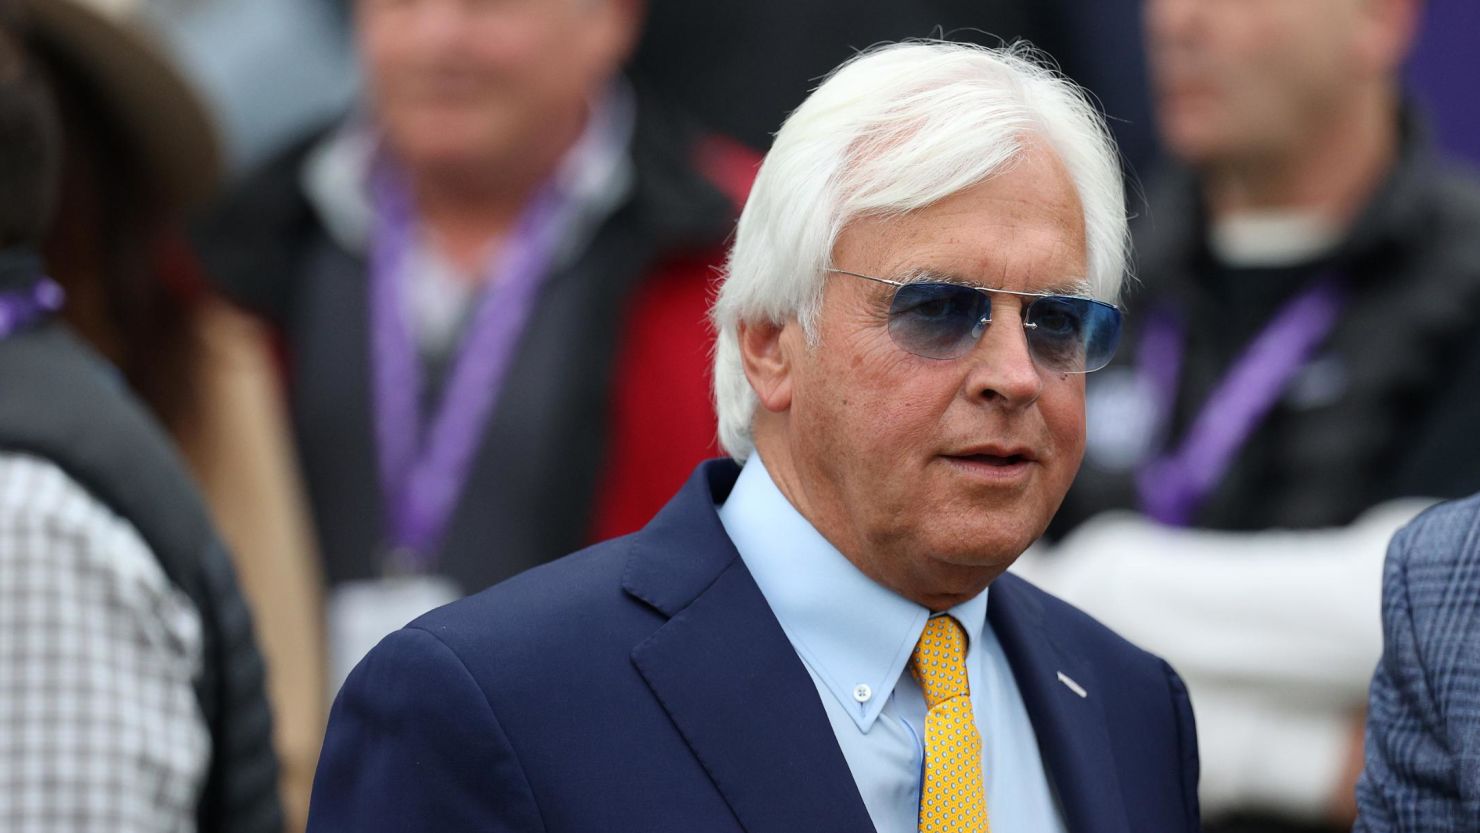 Bob Baffert looks on during last year's Breeders' Cup Juvenile at Del Mar Race Track in California.